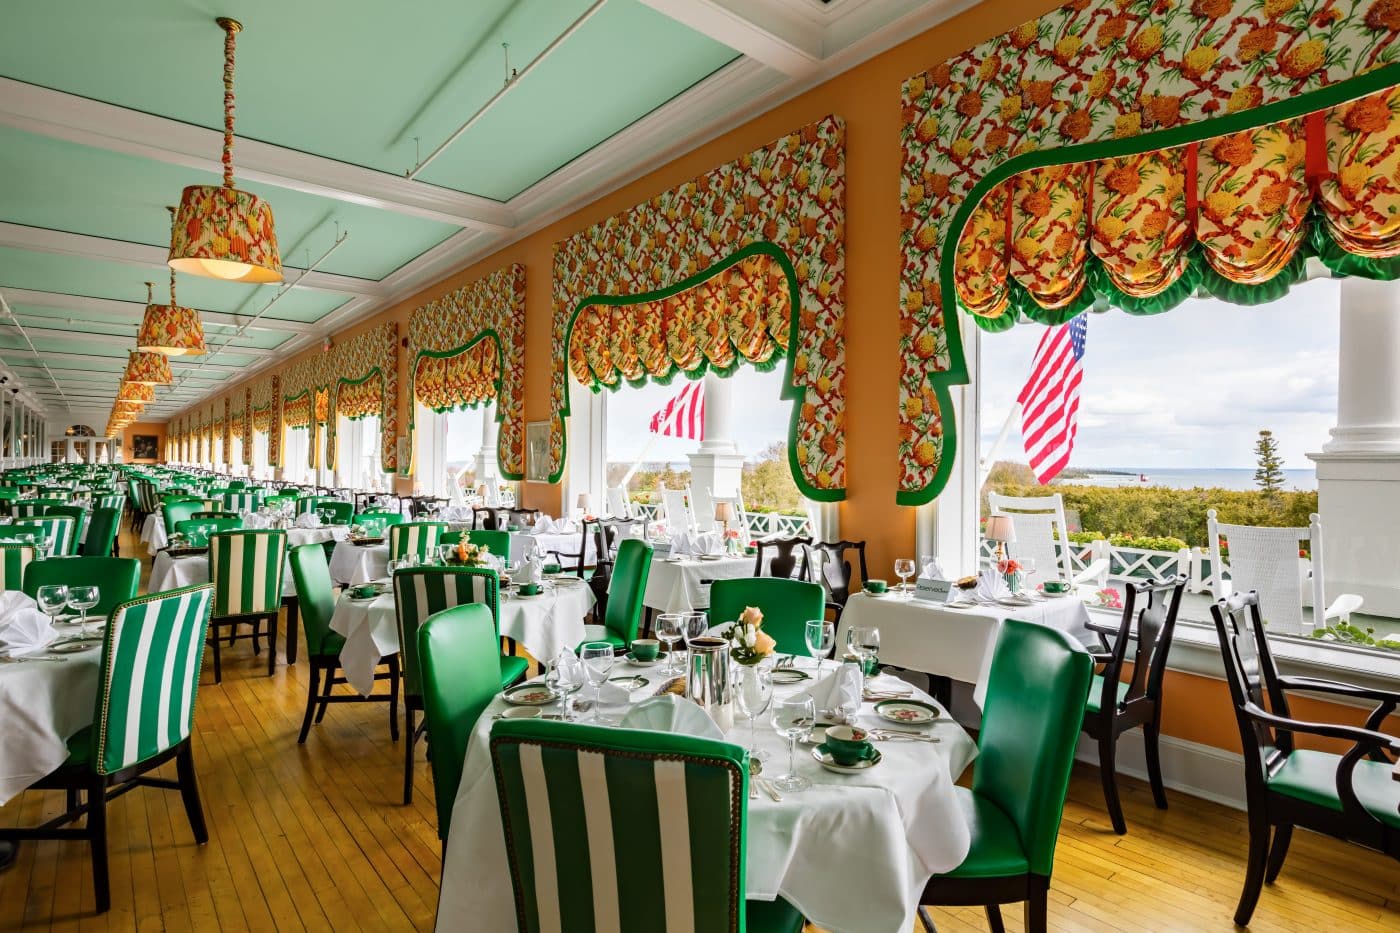 The main dining room at the Grand Hotel in Mackinac Island, Michigan